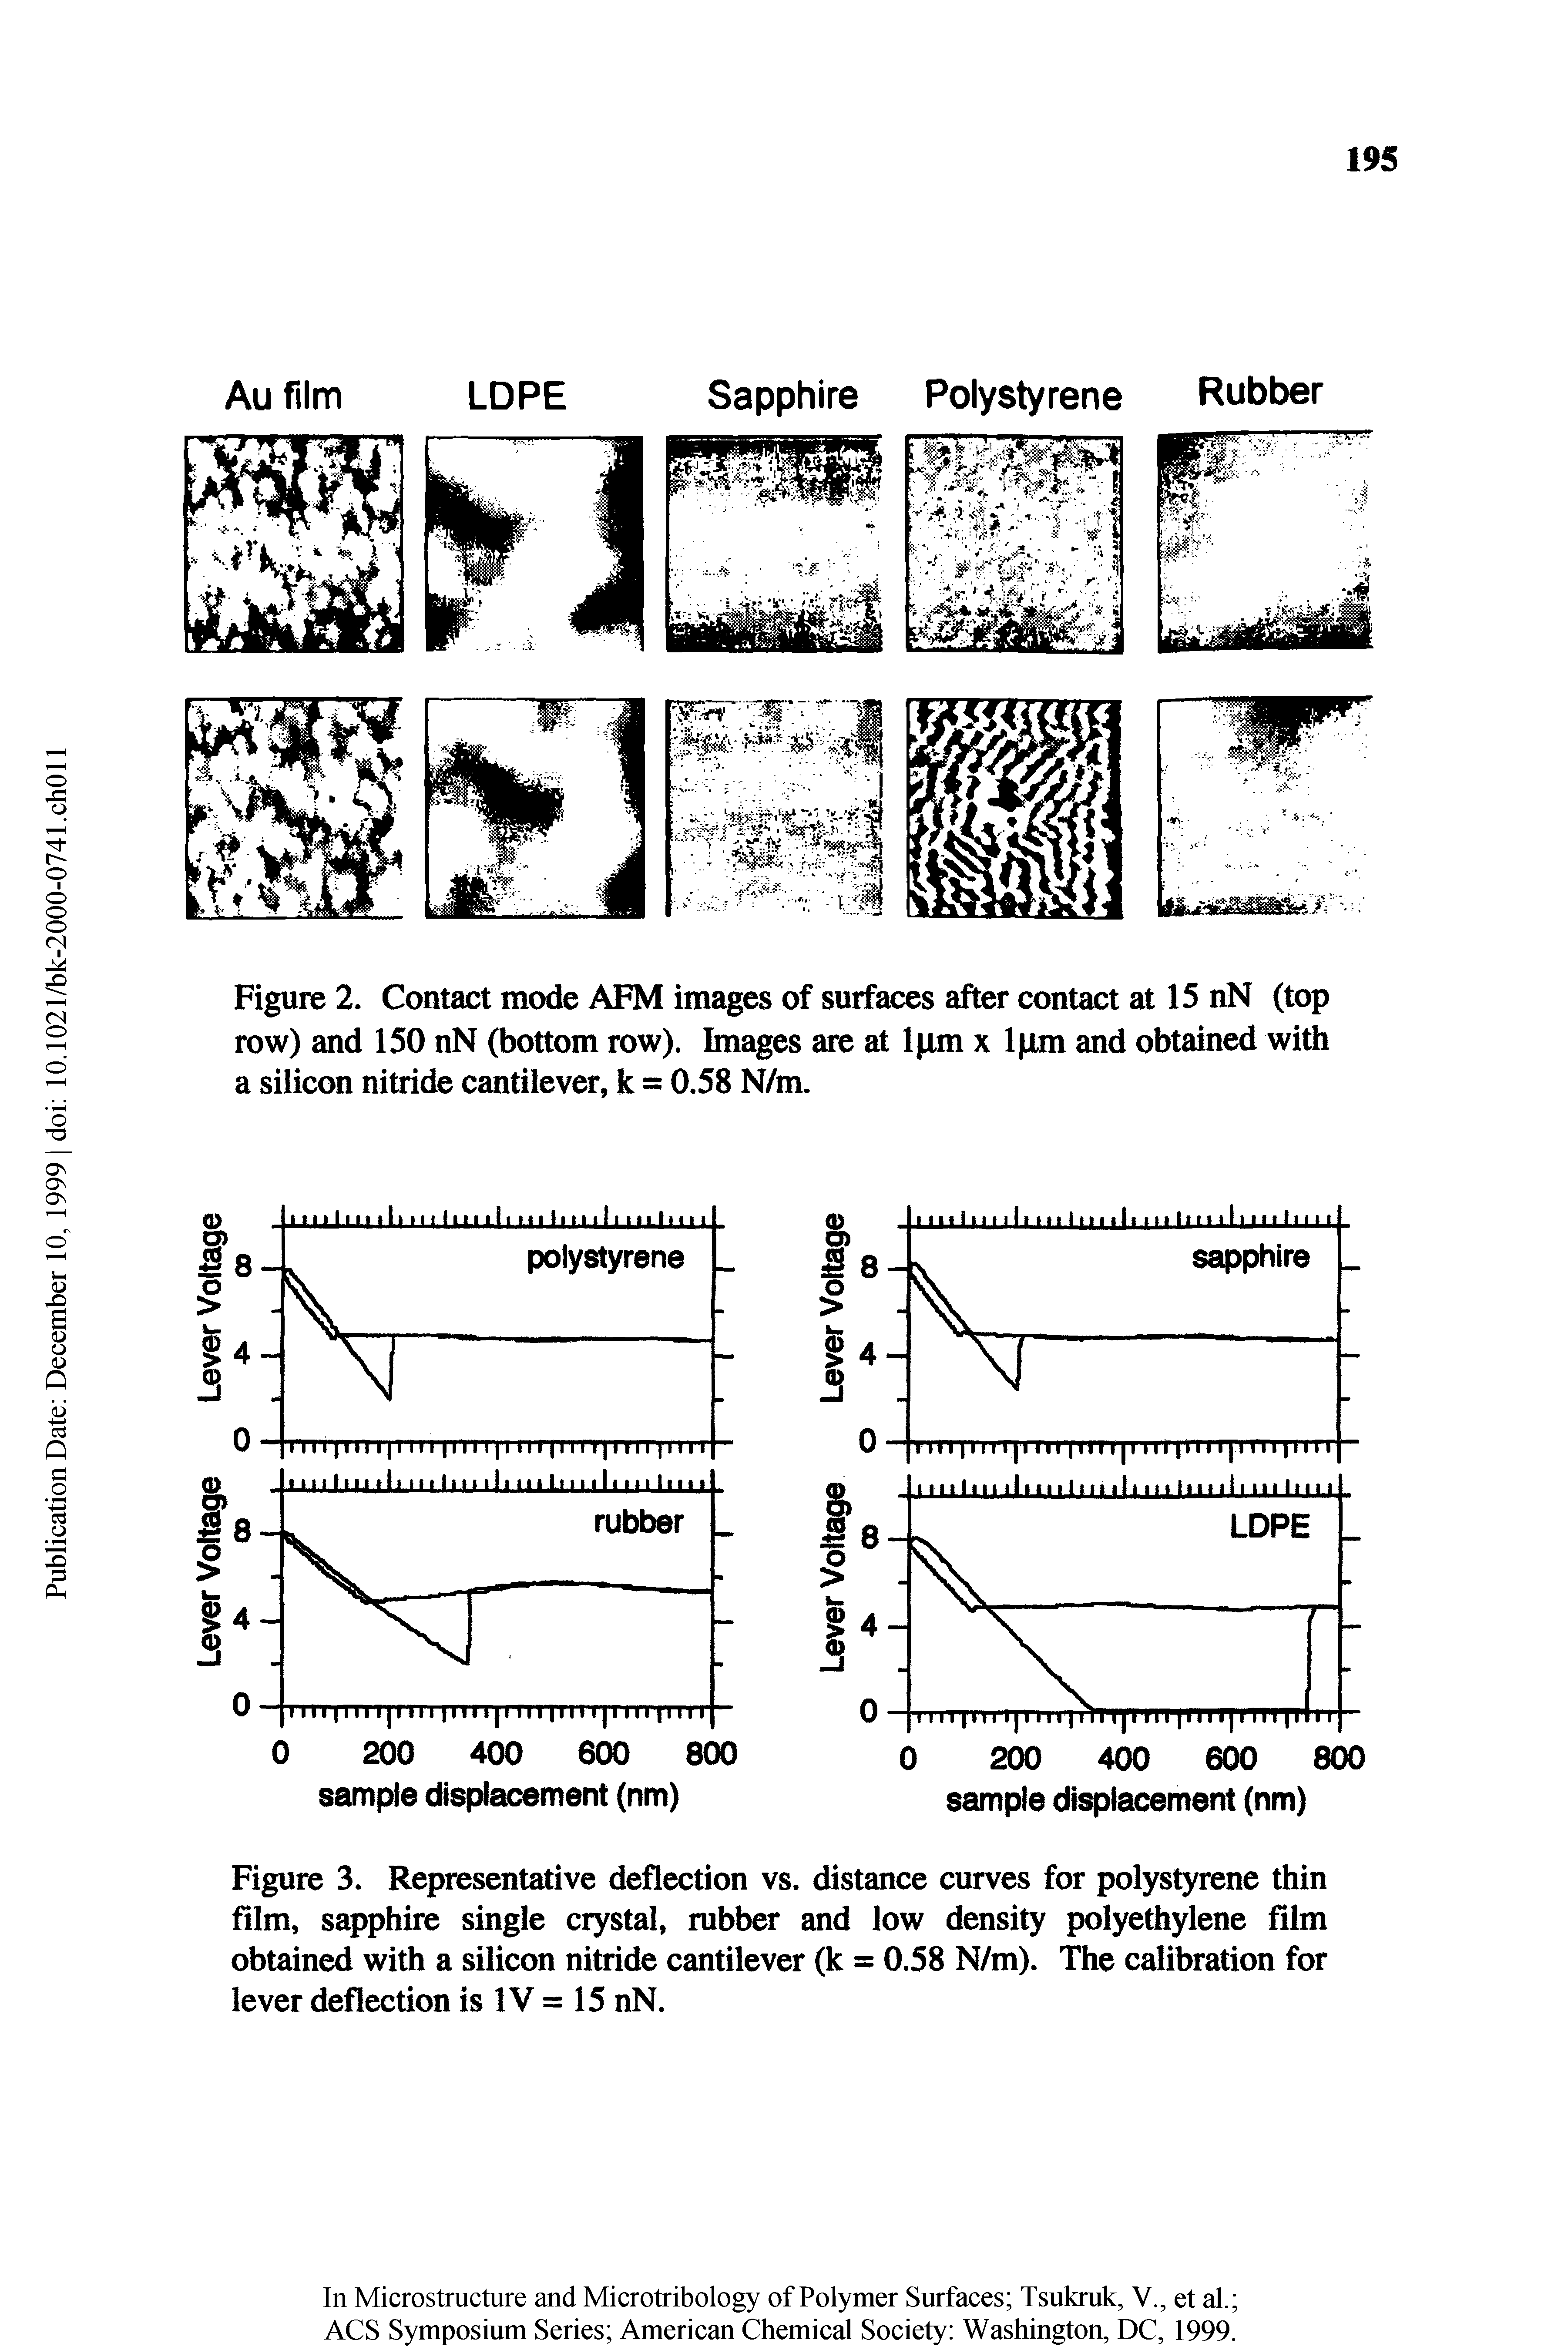 Figure 3. Rq>resentative deflection vs. distance curves for polystyrene thin film, sapphire single crystal, rubber and low density polyethylene fllm obtained with a silicon nitride cantilever (k = 0.58 N/m). ITie calibration for lever deflection is IV = 15 nN.